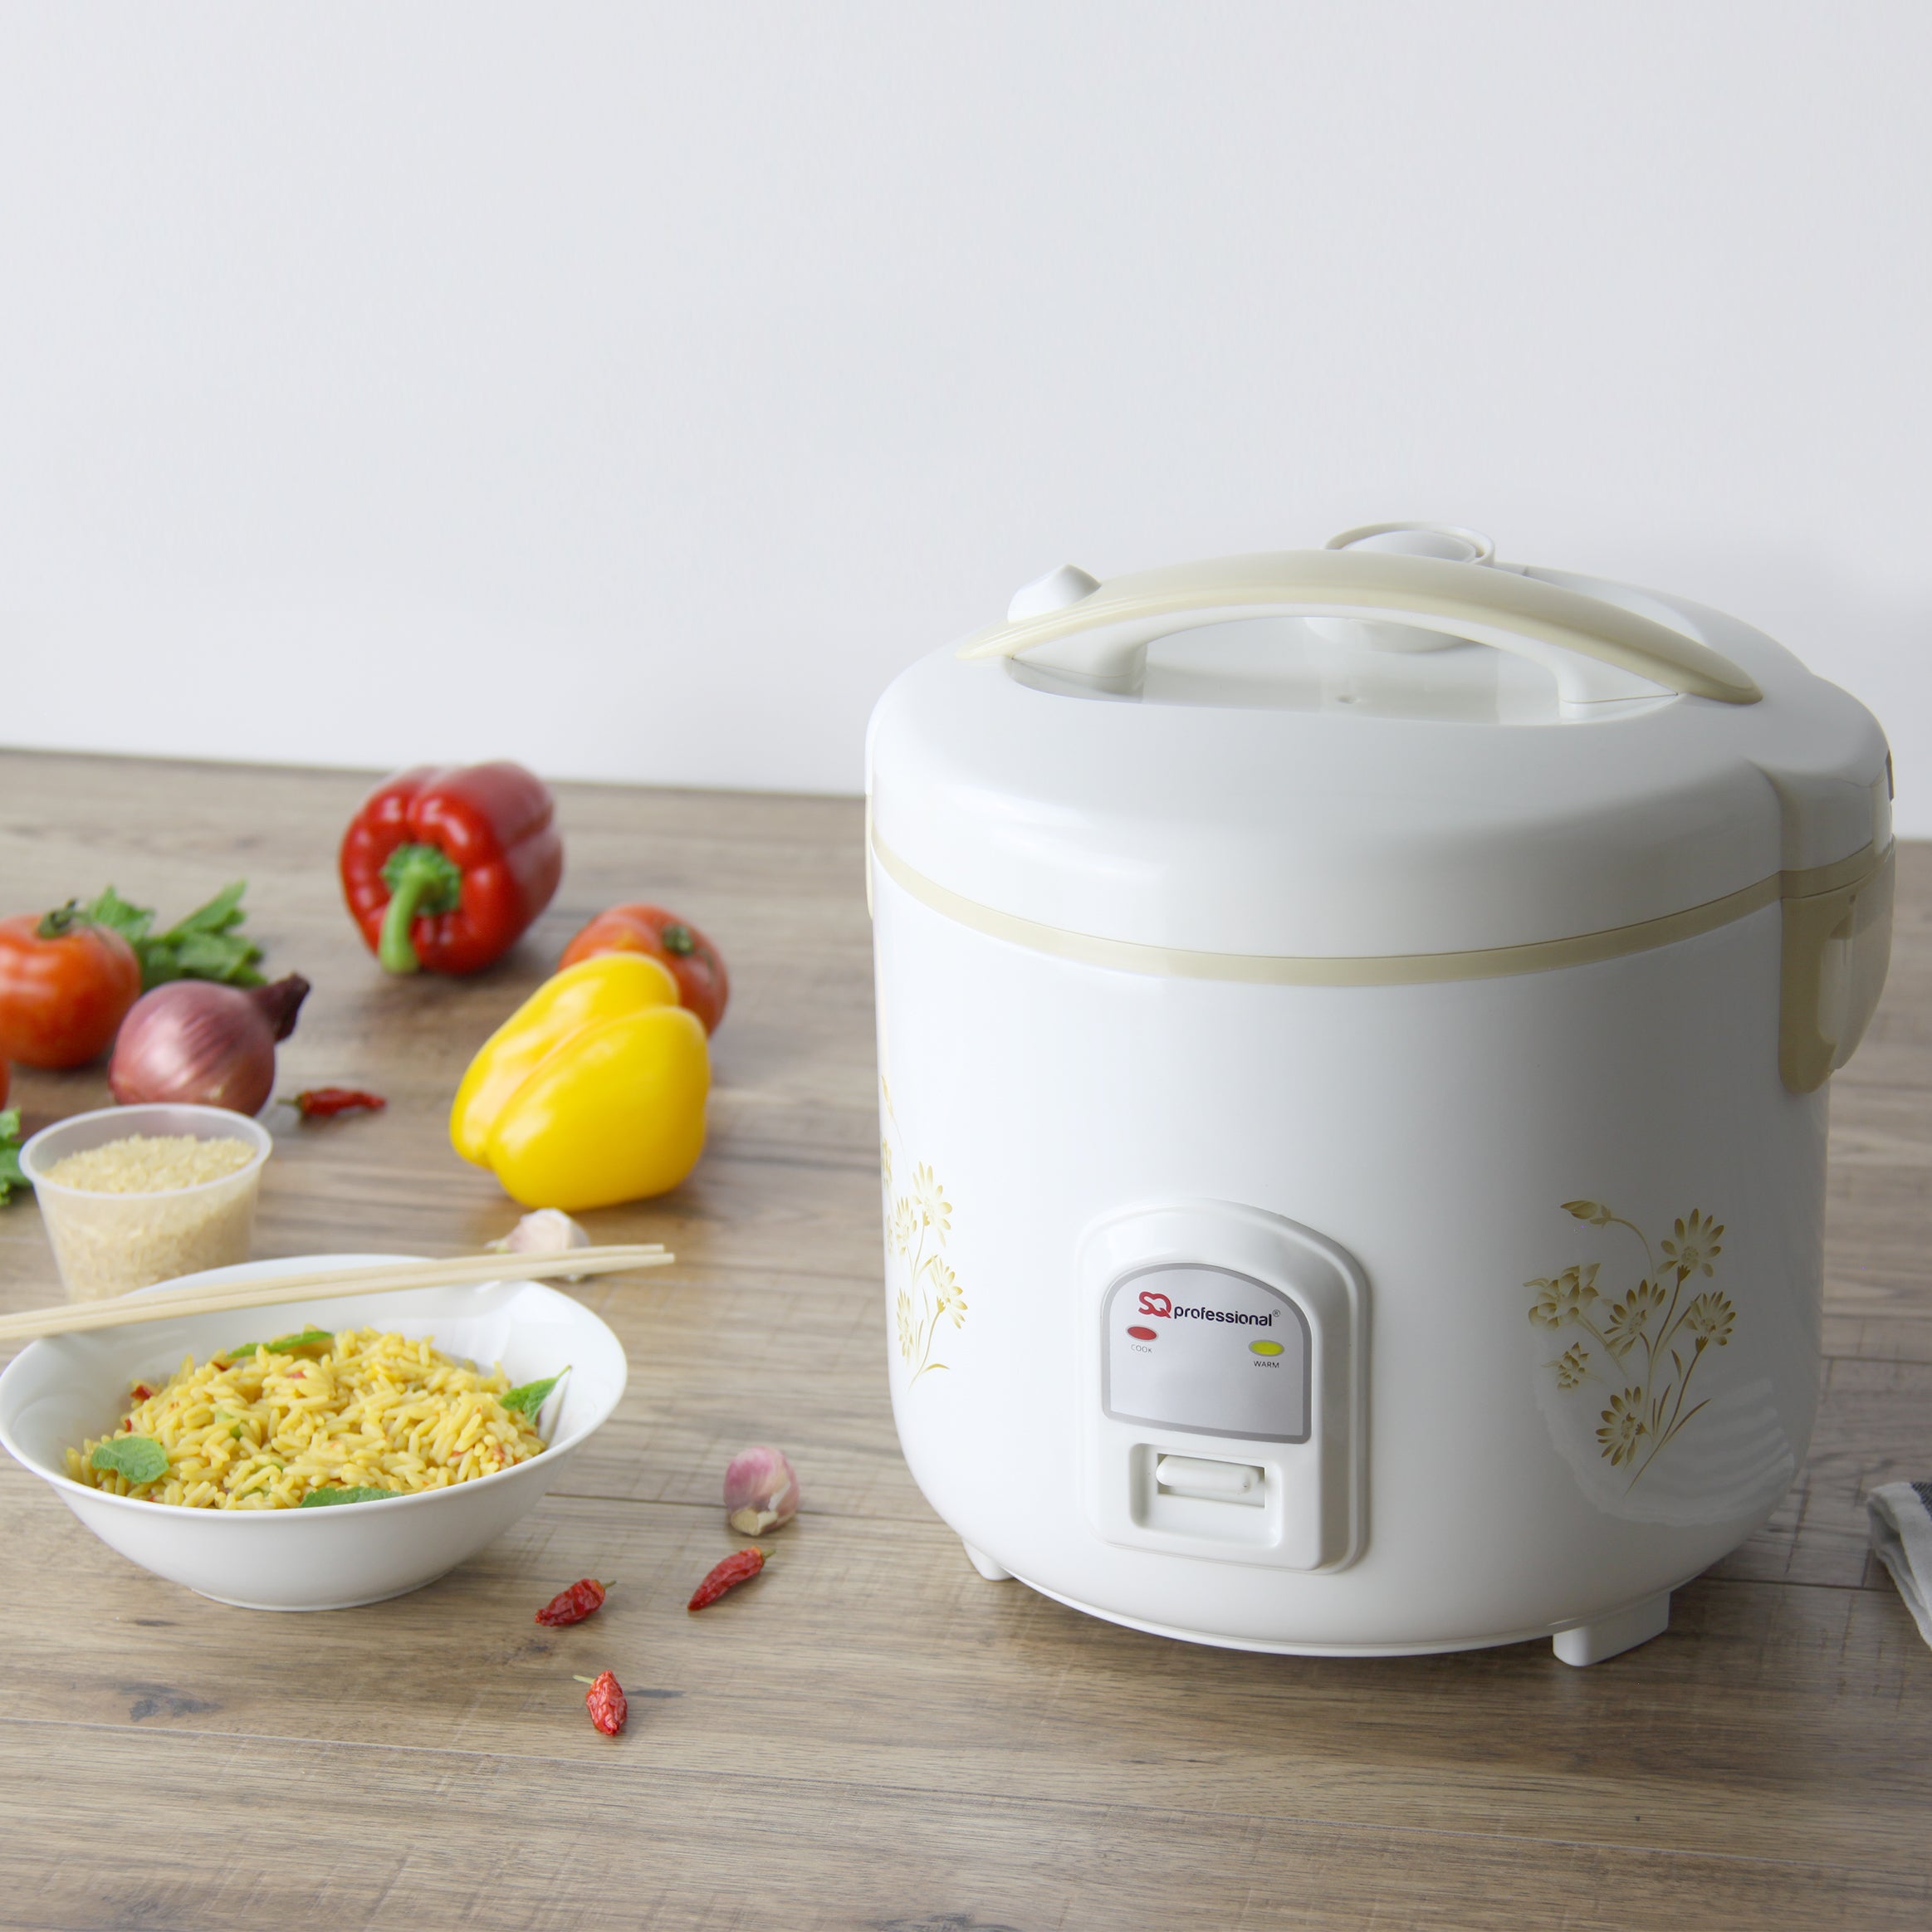 Electric Rice Cooker - DELUXE - White - 1.8 L